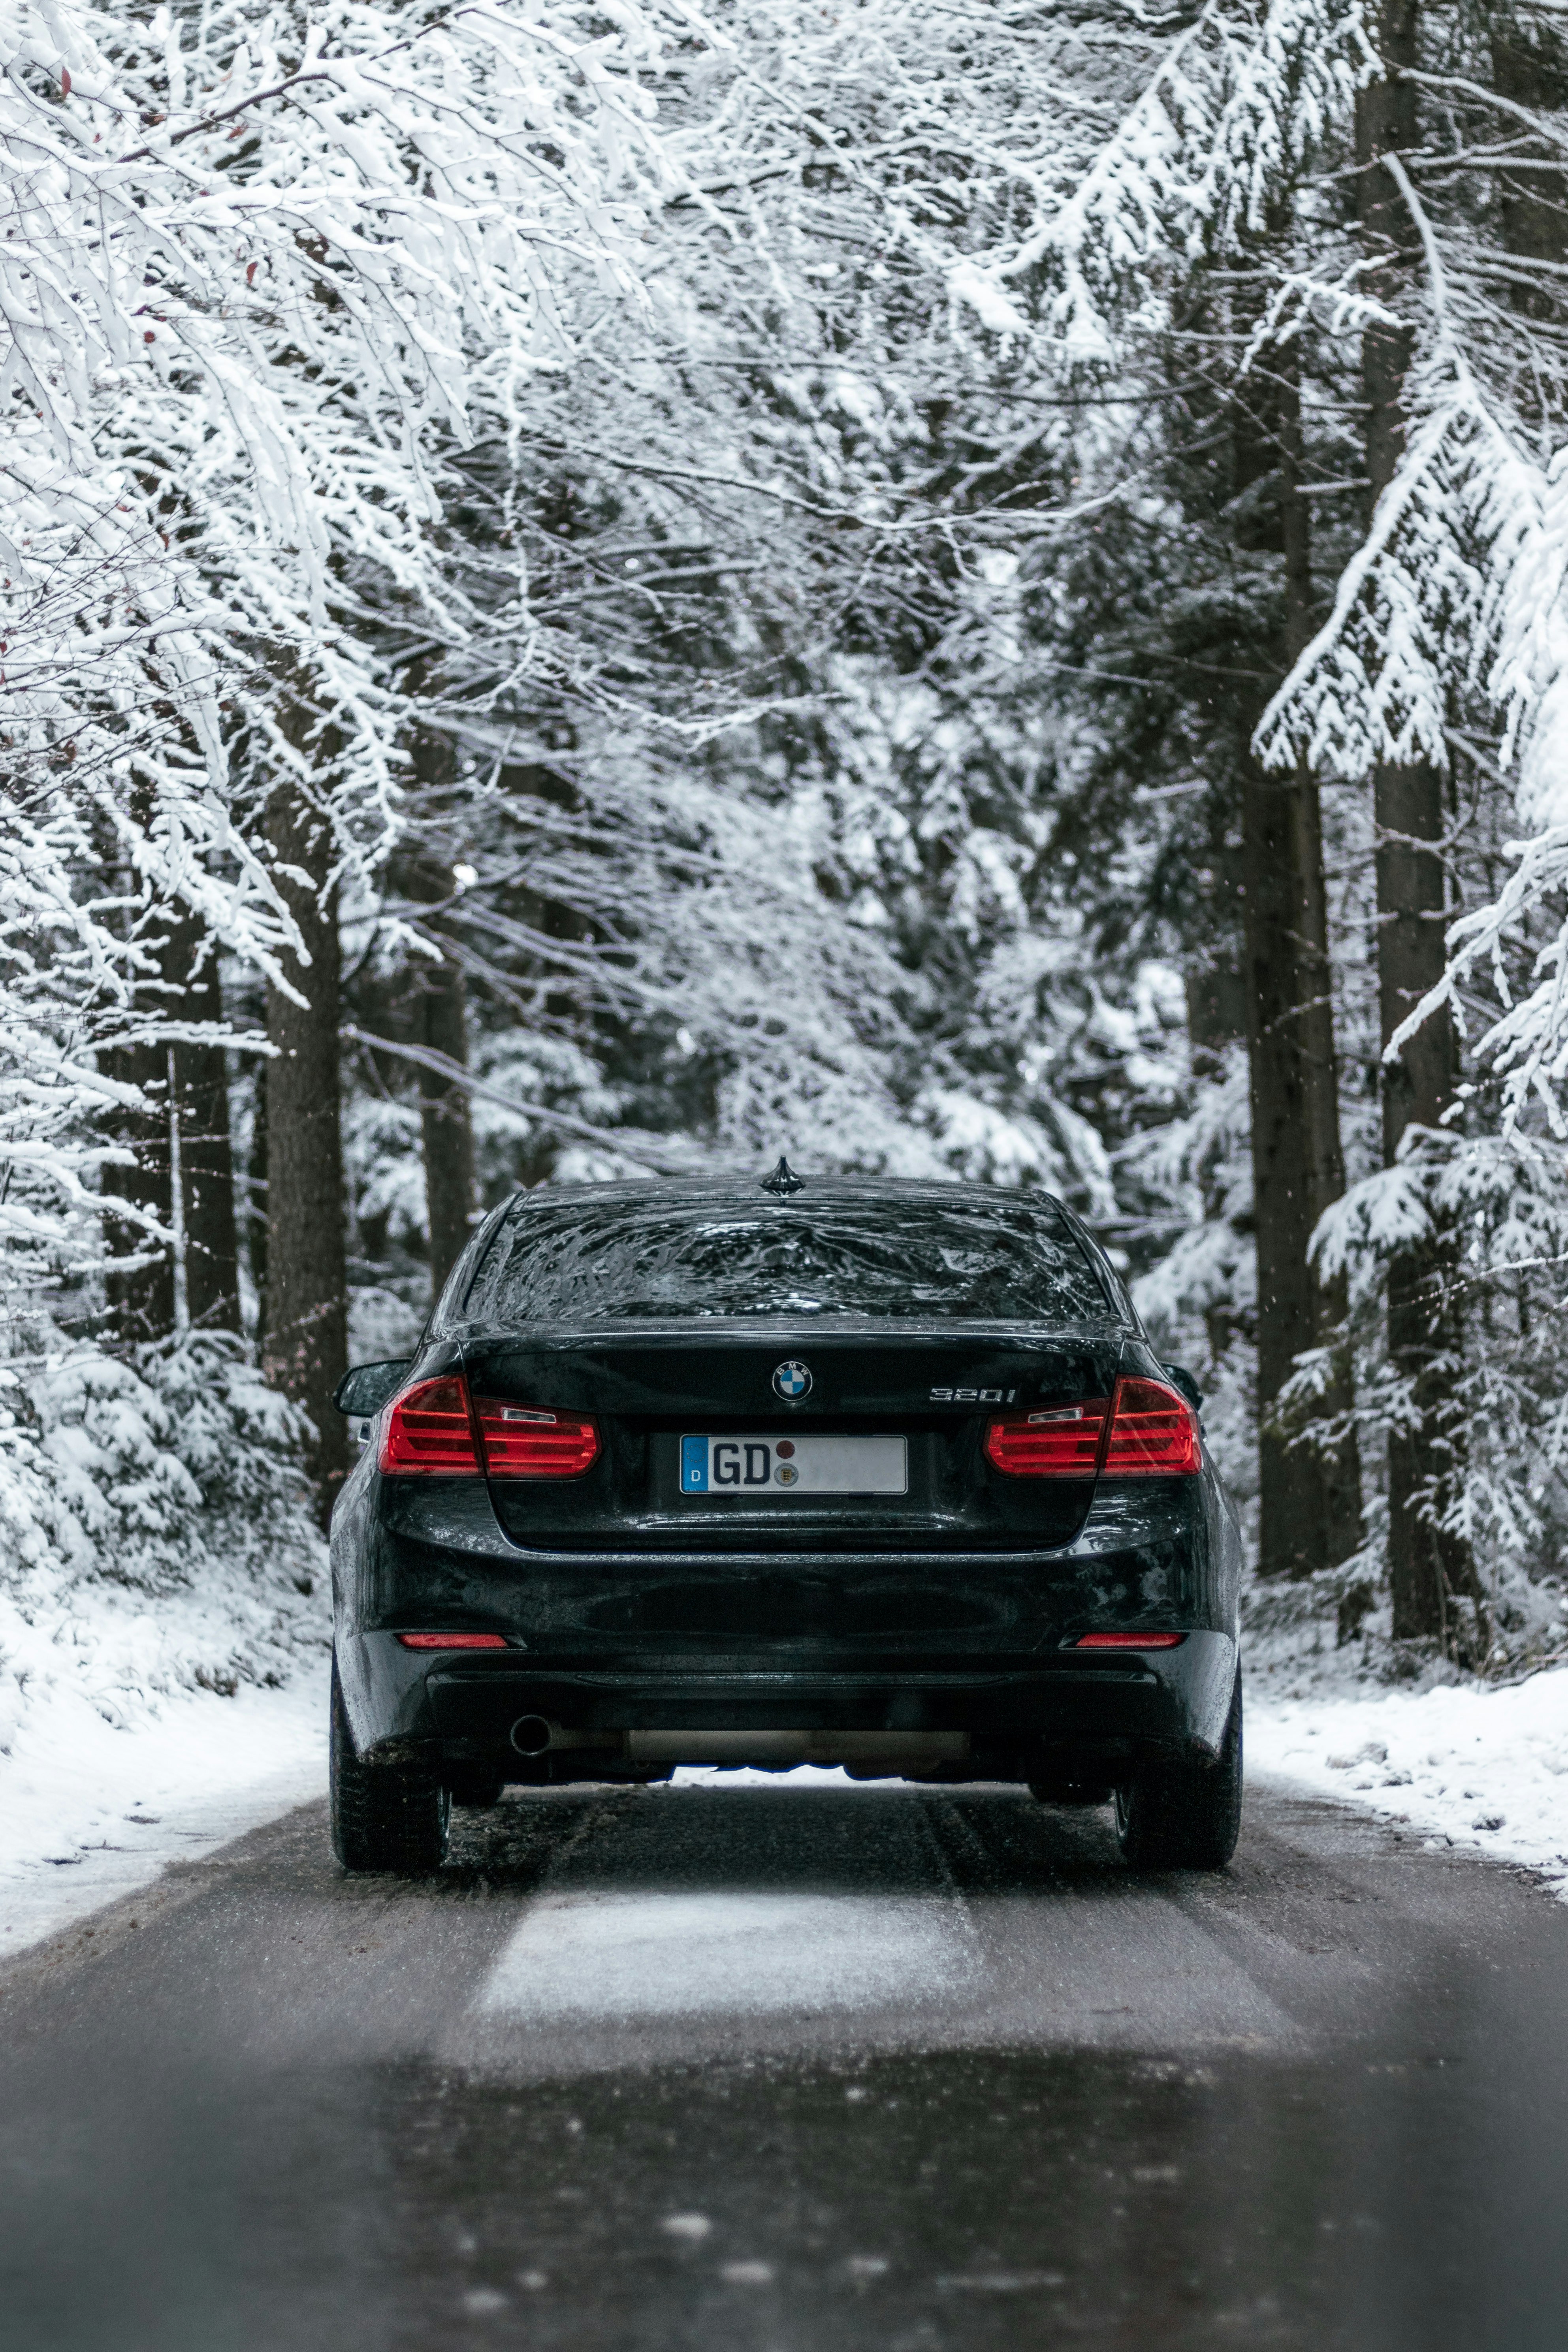 Black BMW 320i in the snowy forest